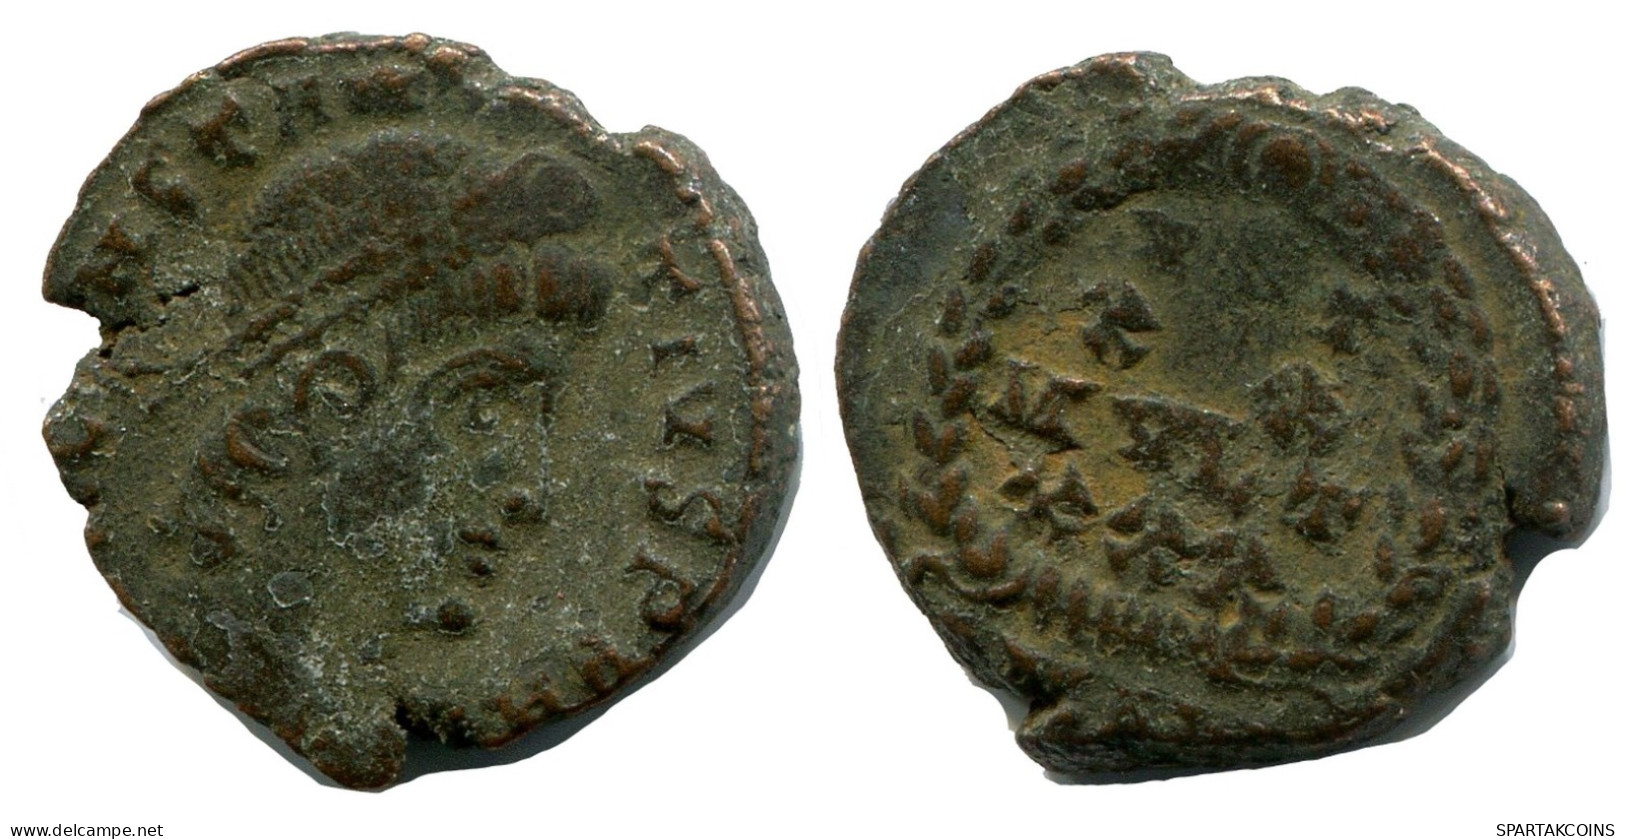 CONSTANTIUS II ALEKSANDRIA FROM THE ROYAL ONTARIO MUSEUM #ANC10268.14.U.A - The Christian Empire (307 AD Tot 363 AD)